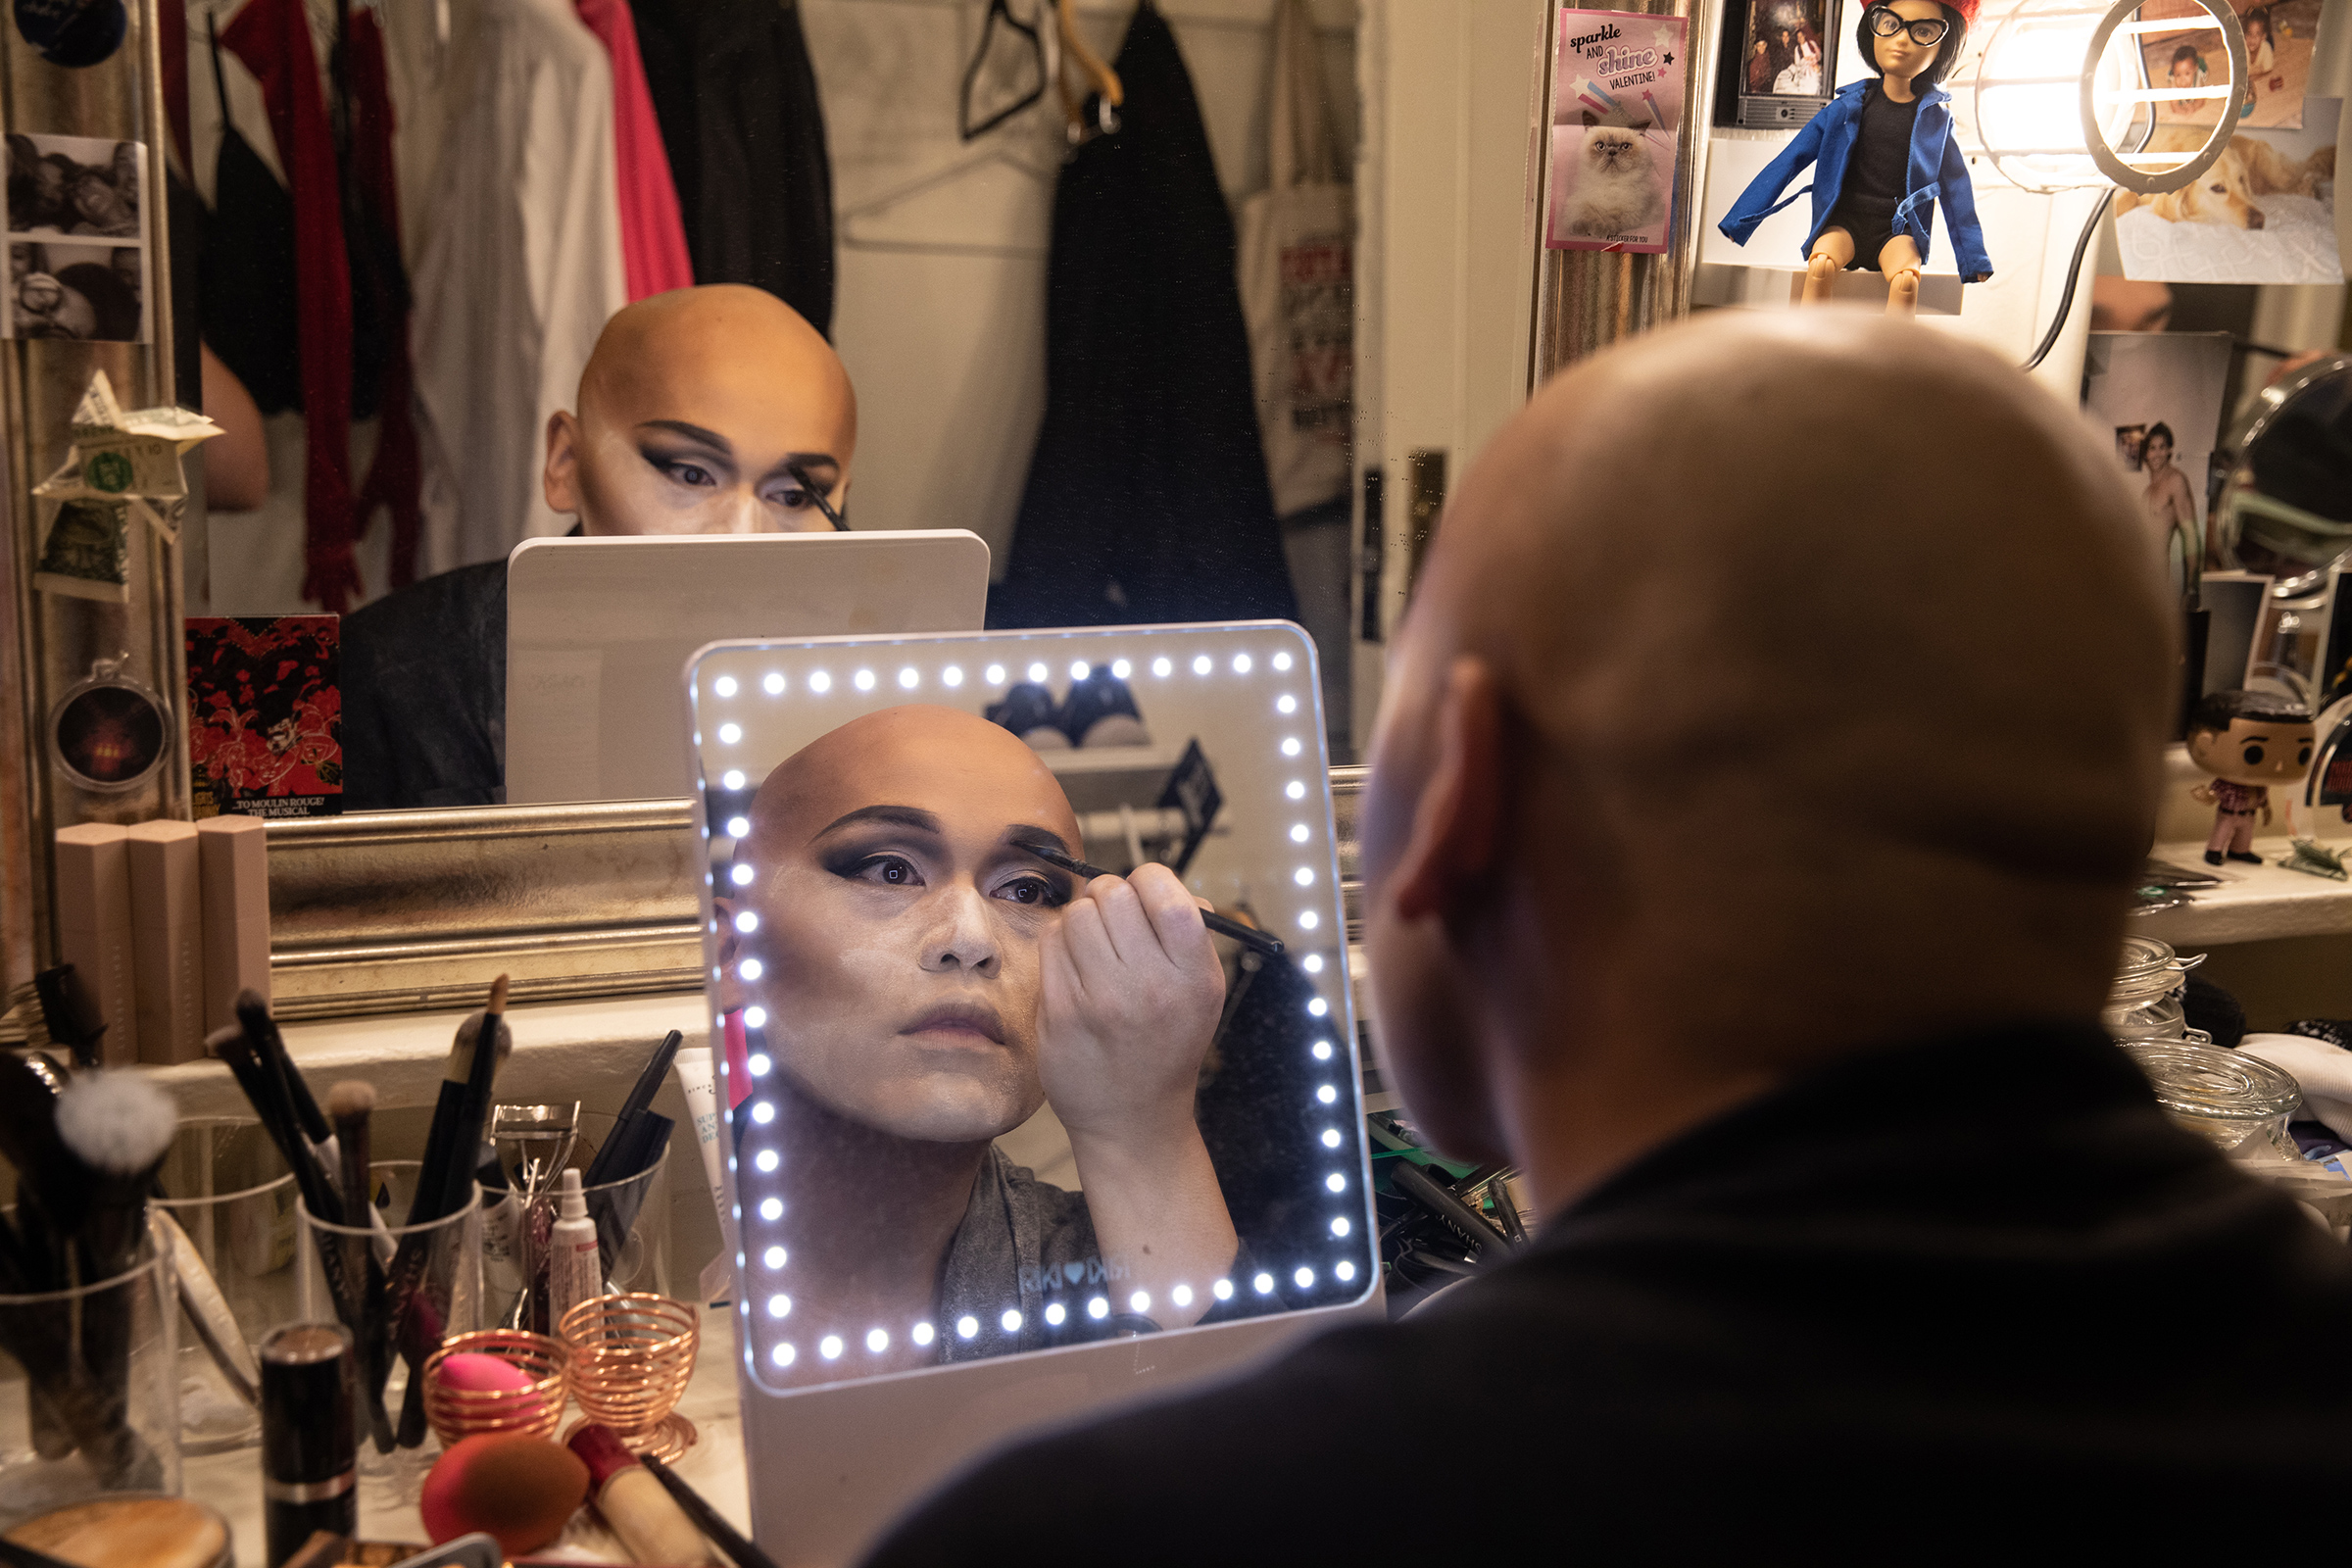 Actor, Jeigh Madjus who plays 'Babydoll' doing his makeup in the dressing room backstage before rehearsal for Moulin Rouge! on Sept. 21, 2021. Madjus says sometimes his makeup can take up to two hours to complete.